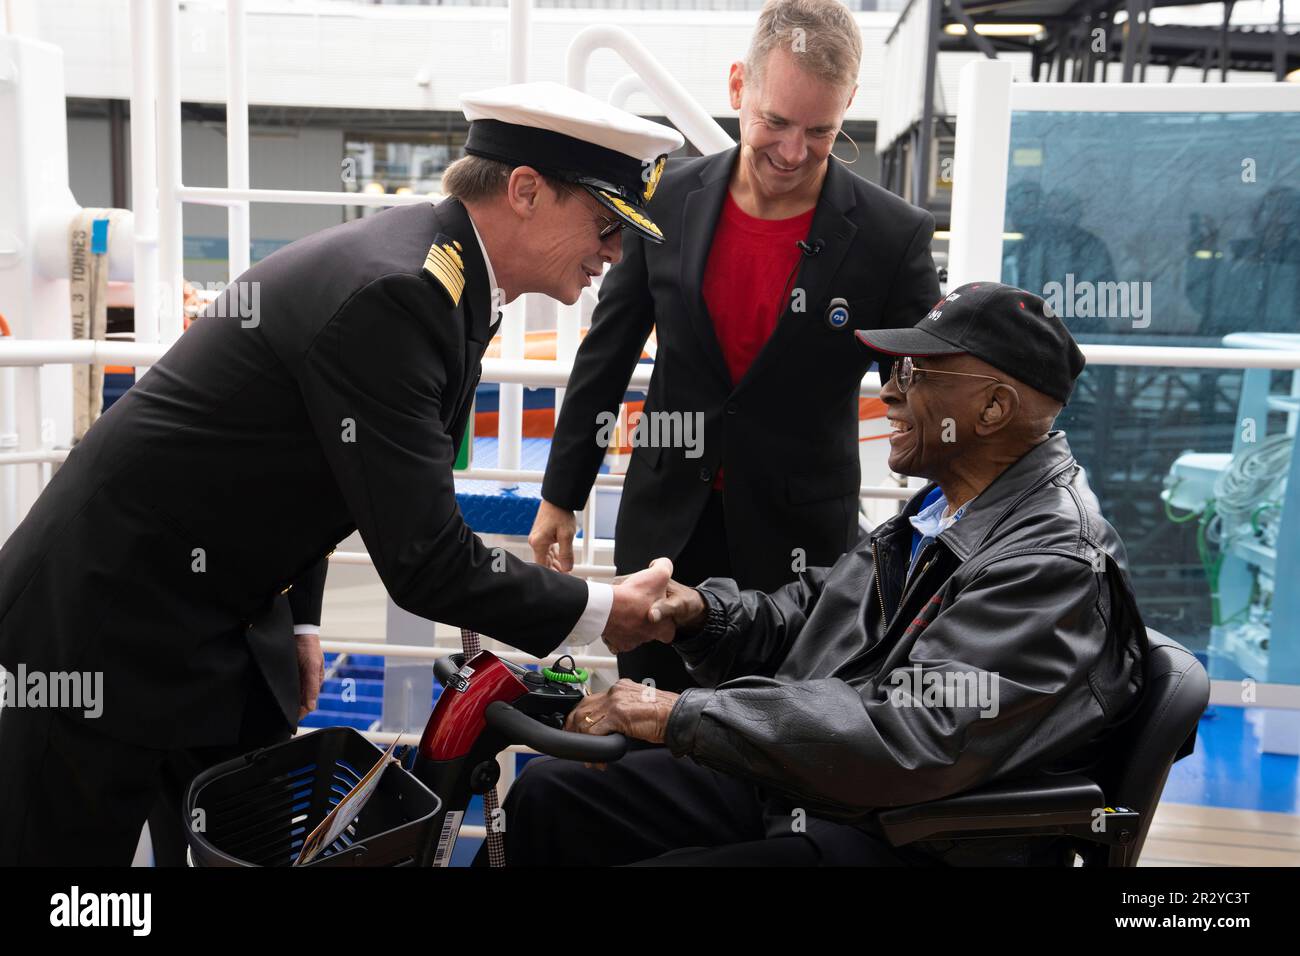 IMAGE DISTRIBUTED FOR PRINCESS CRUISES - Discovery Princess Capt. John  Smith, left, and Princess Cruises President John Padgett, center, greet  retired Lt. Col. James H. Harvey III, a Tuskegee airman, as he